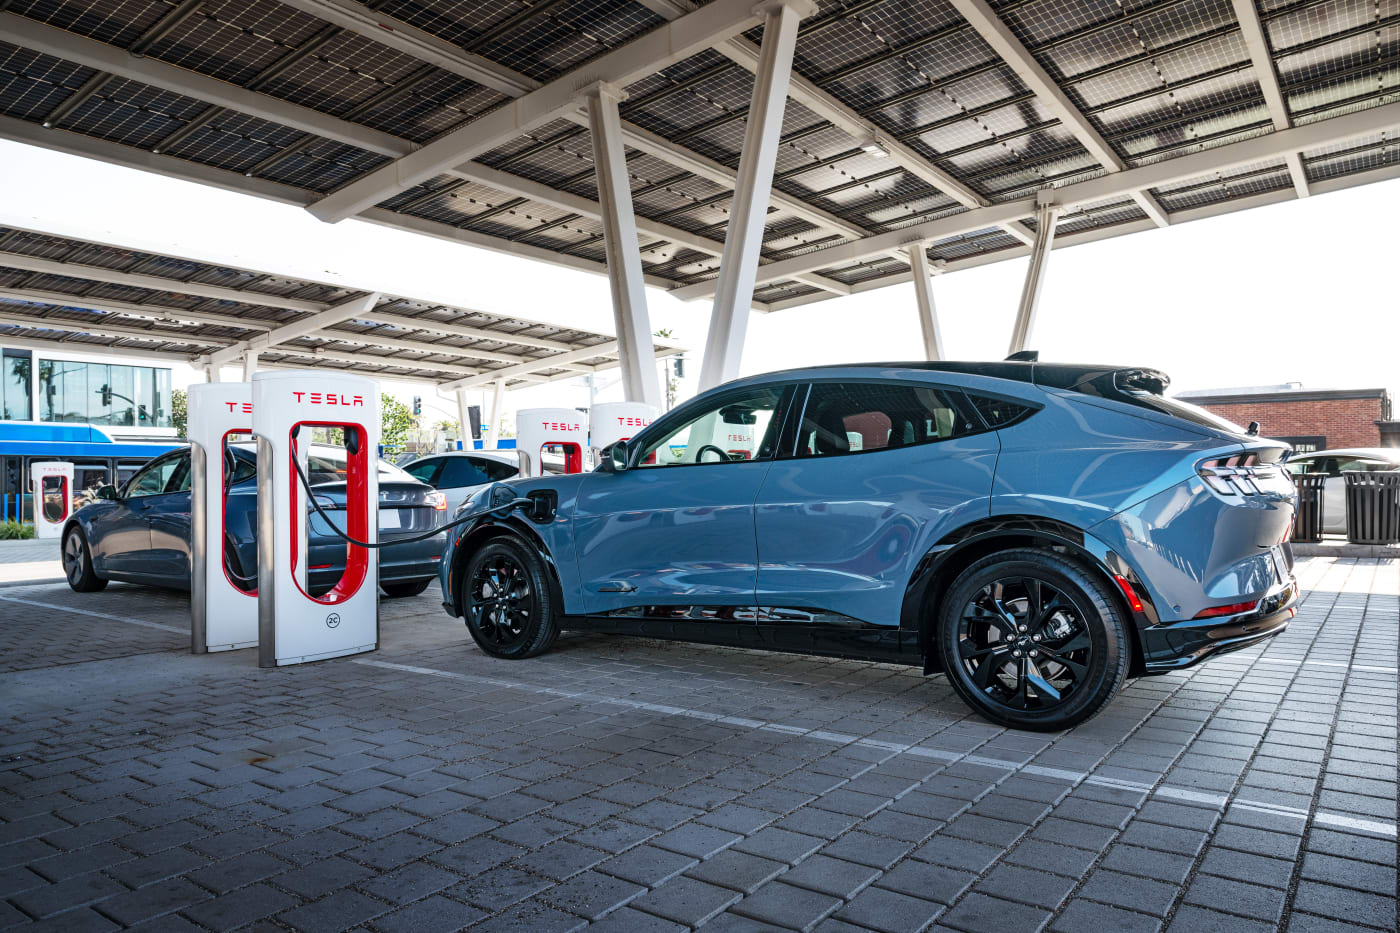 Ford EV owners can now use Tesla Superchargers in the US and Canada